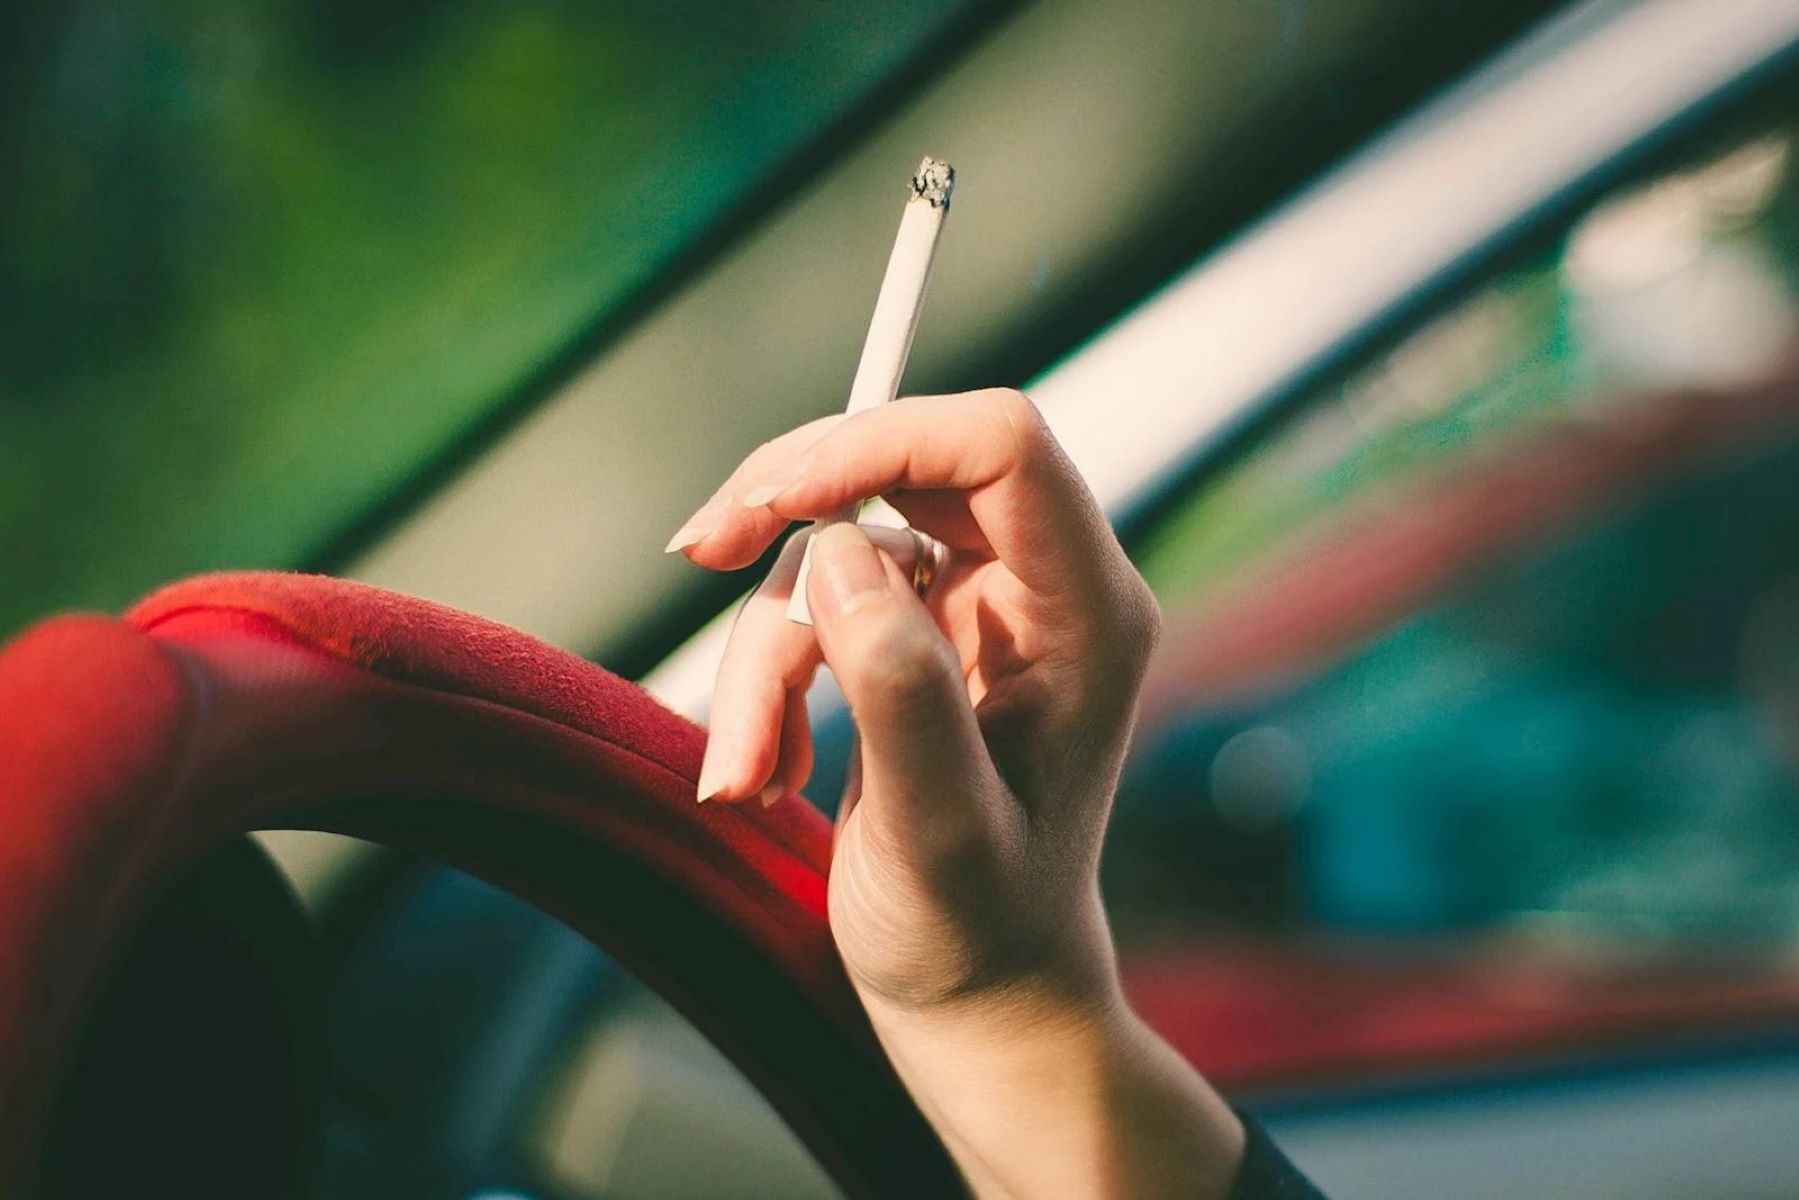 How To Get Cigarette Smell Out Of Car